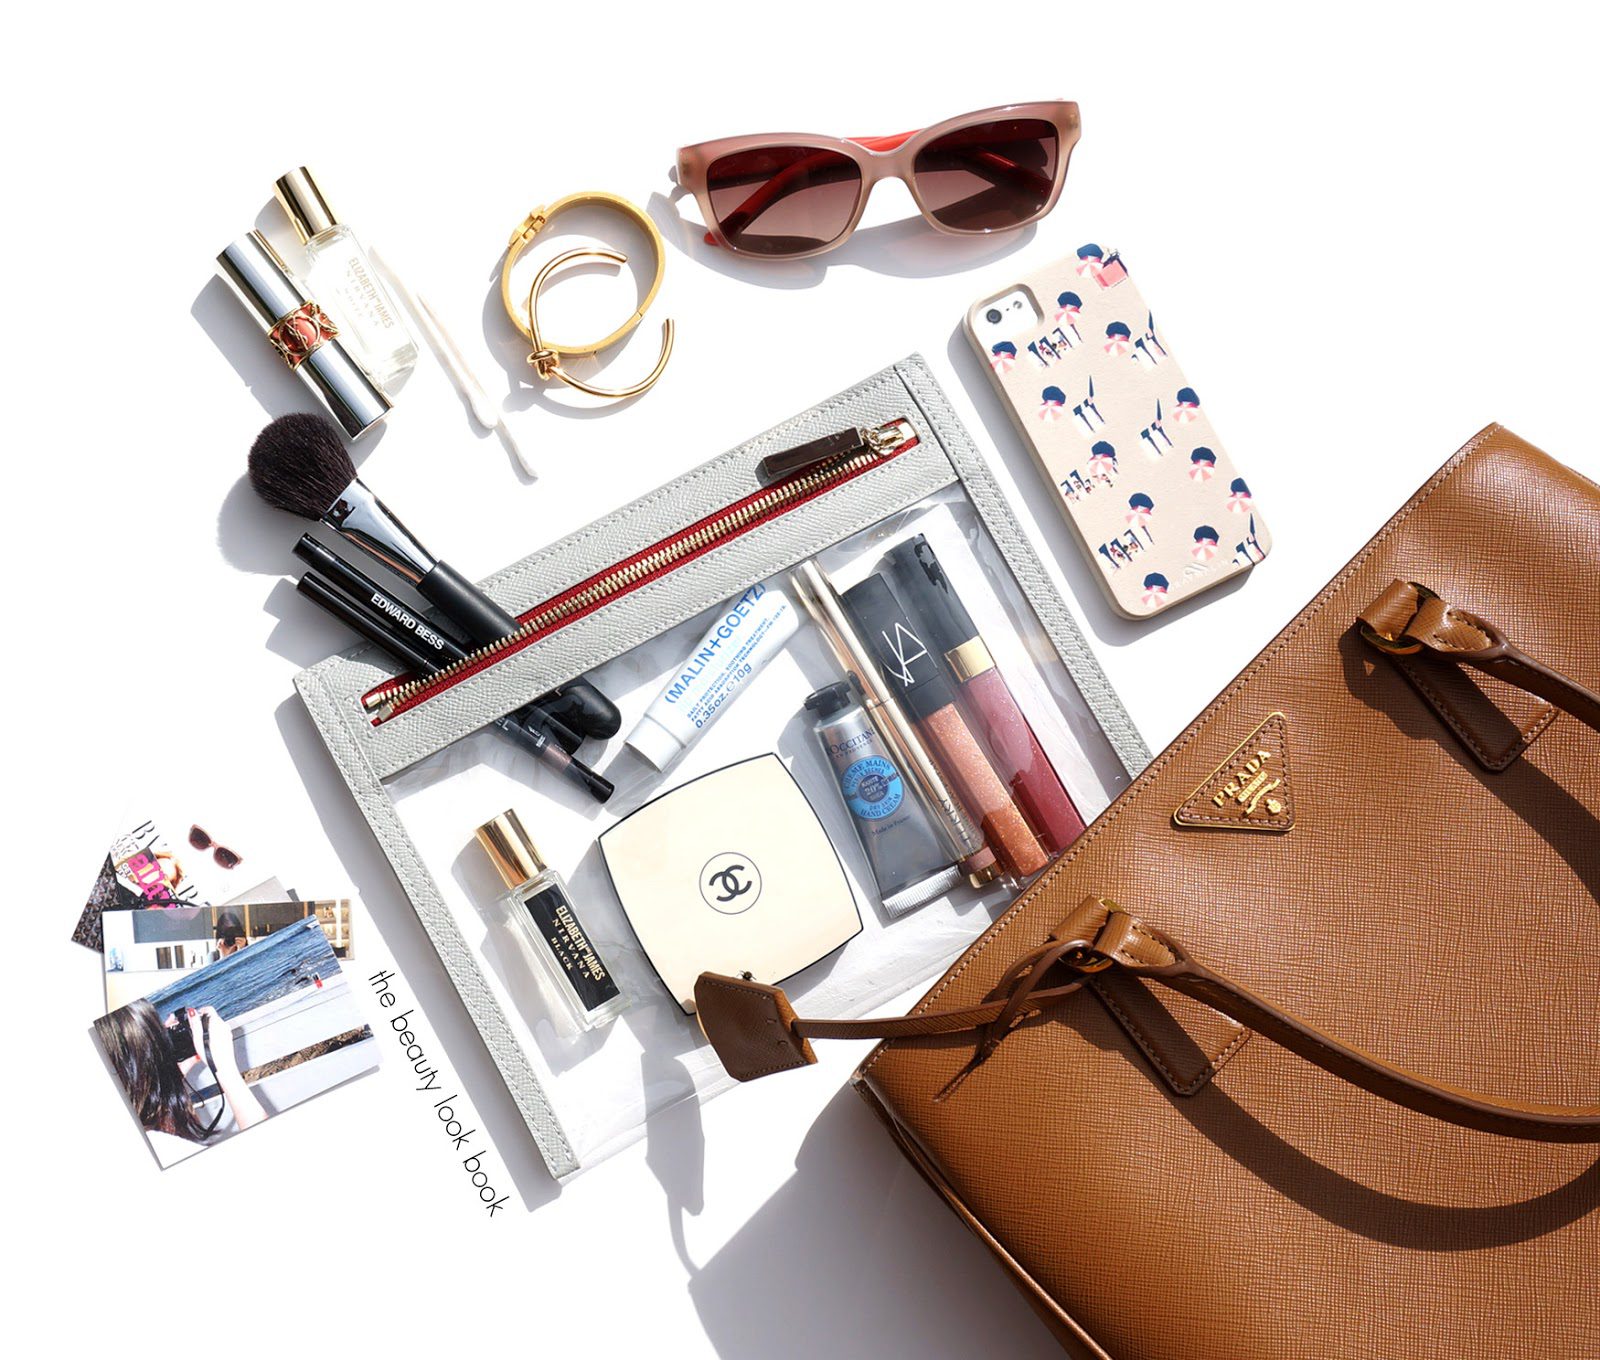 What's In My Bag Archives - The Beauty Look Book